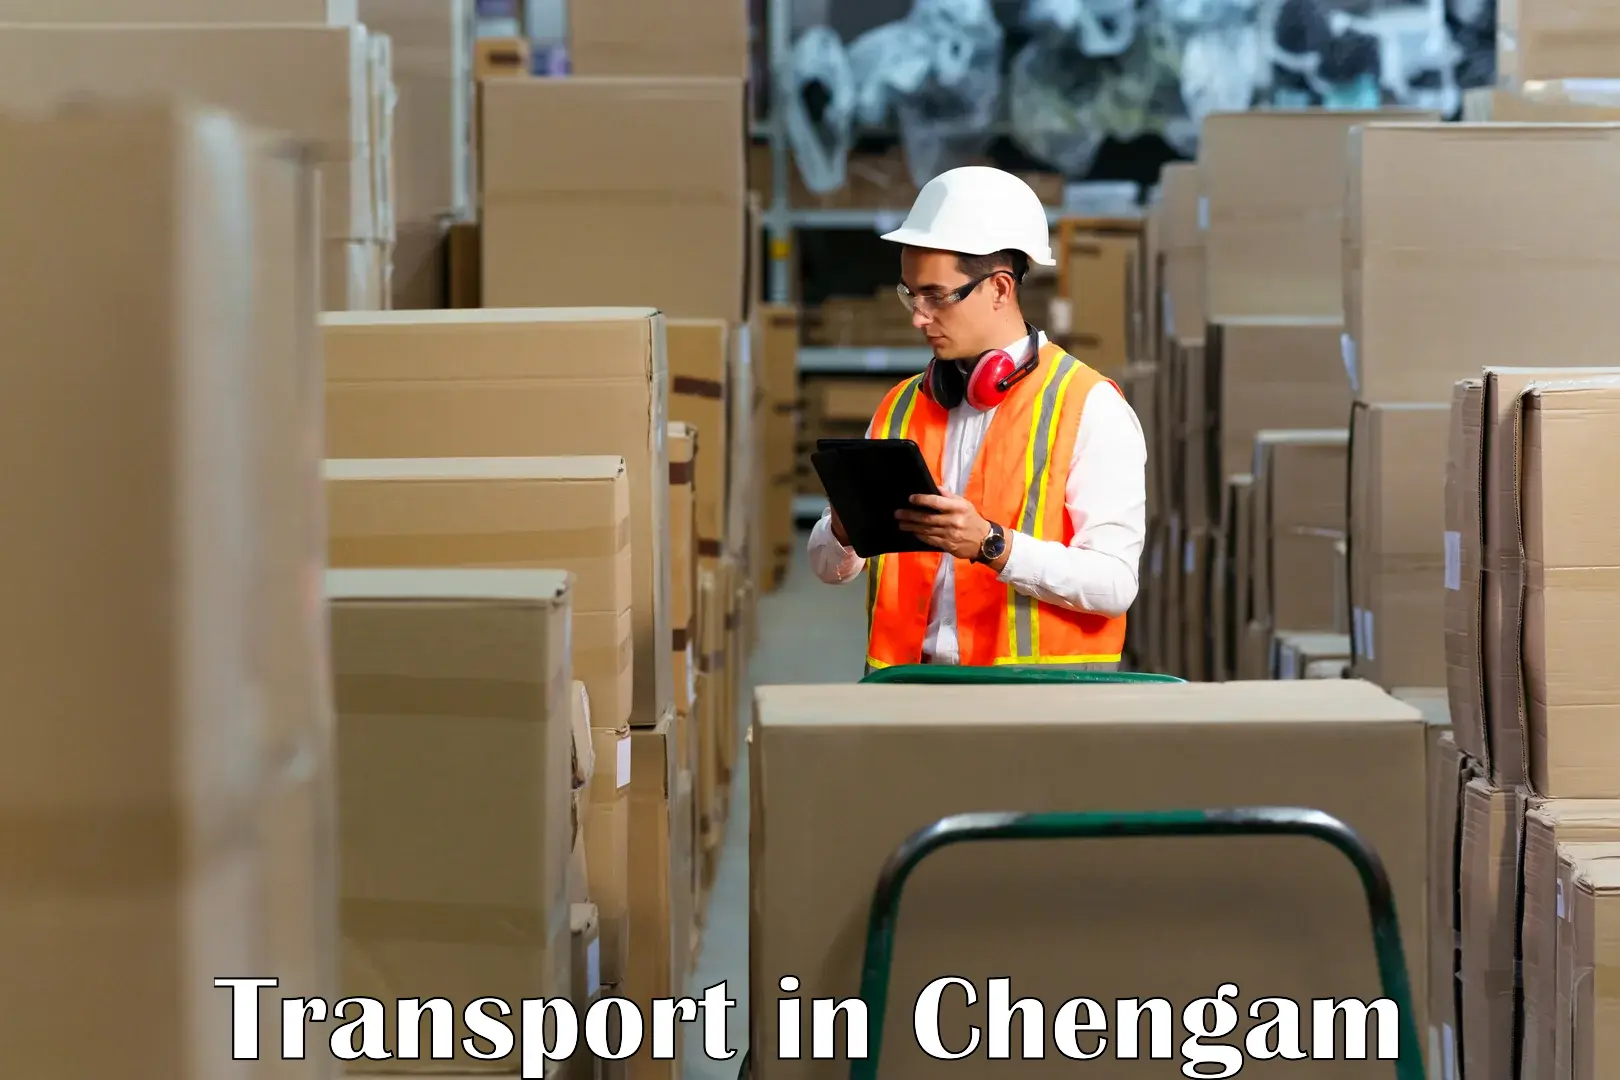 Air cargo transport services in Chengam